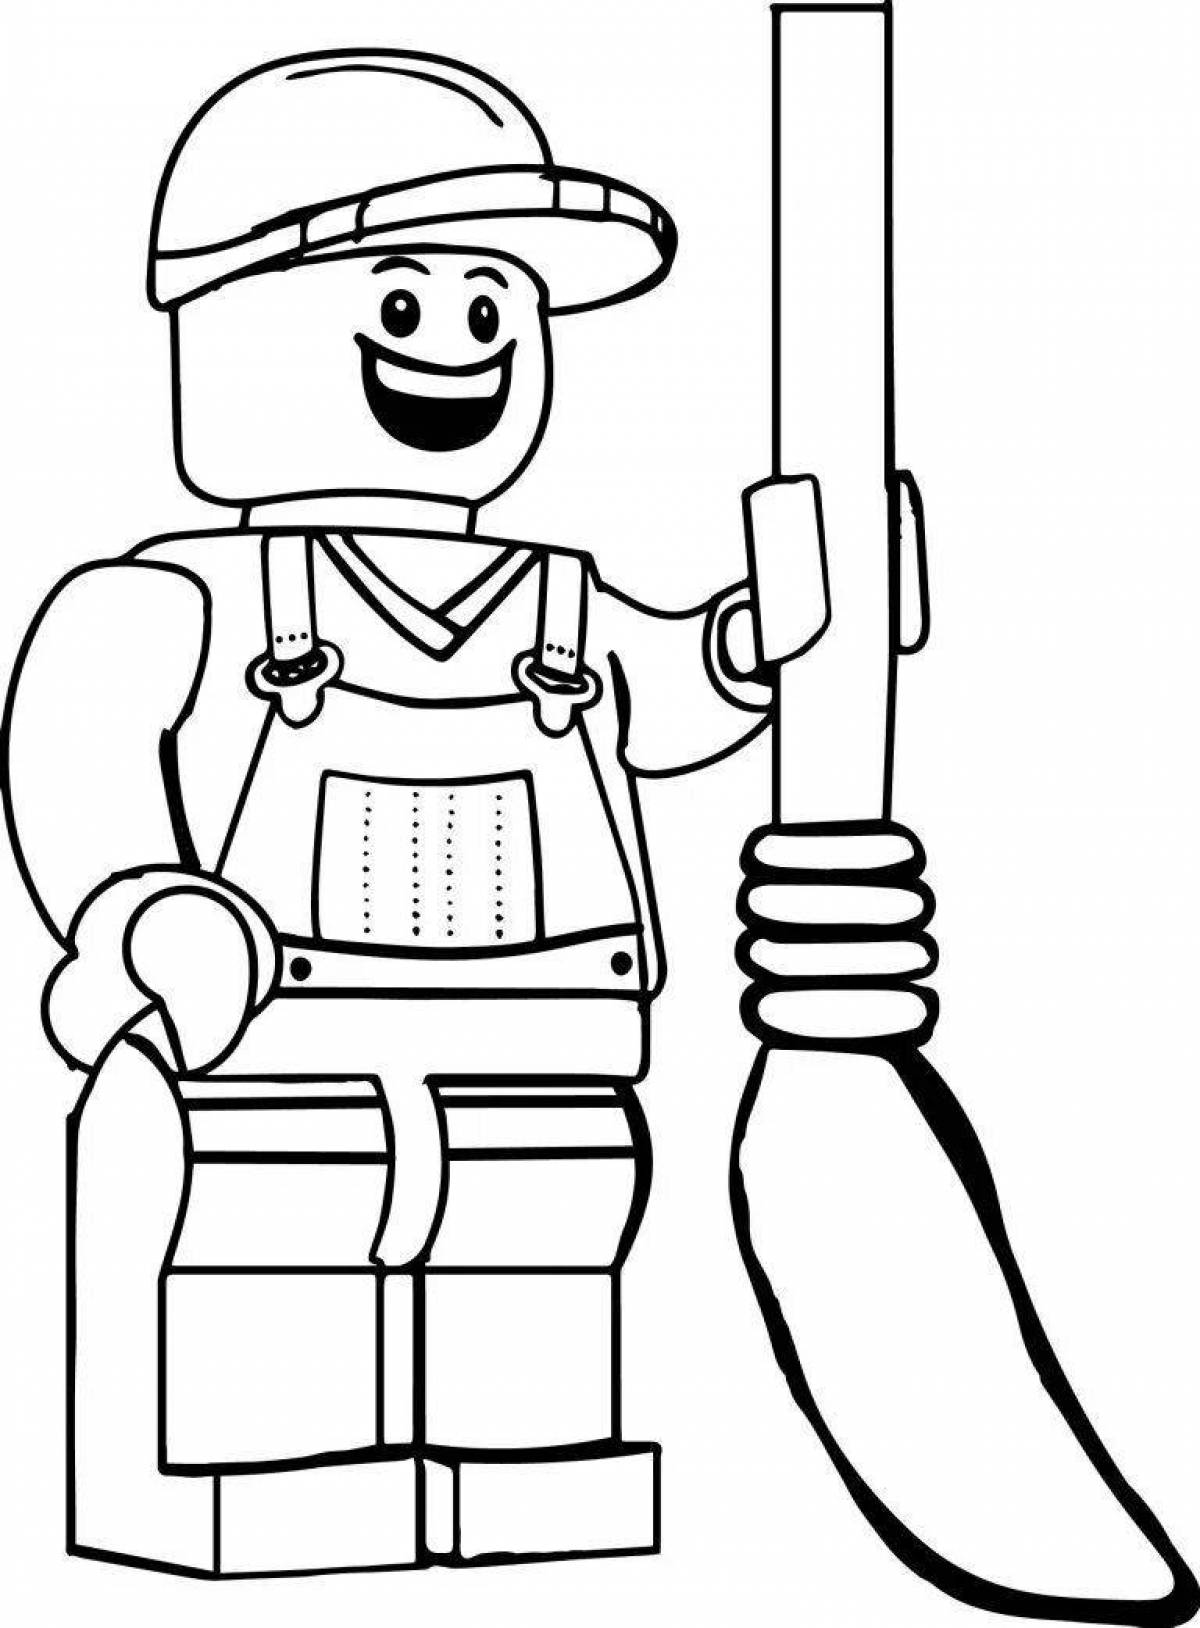 Playful lego cop coloring page